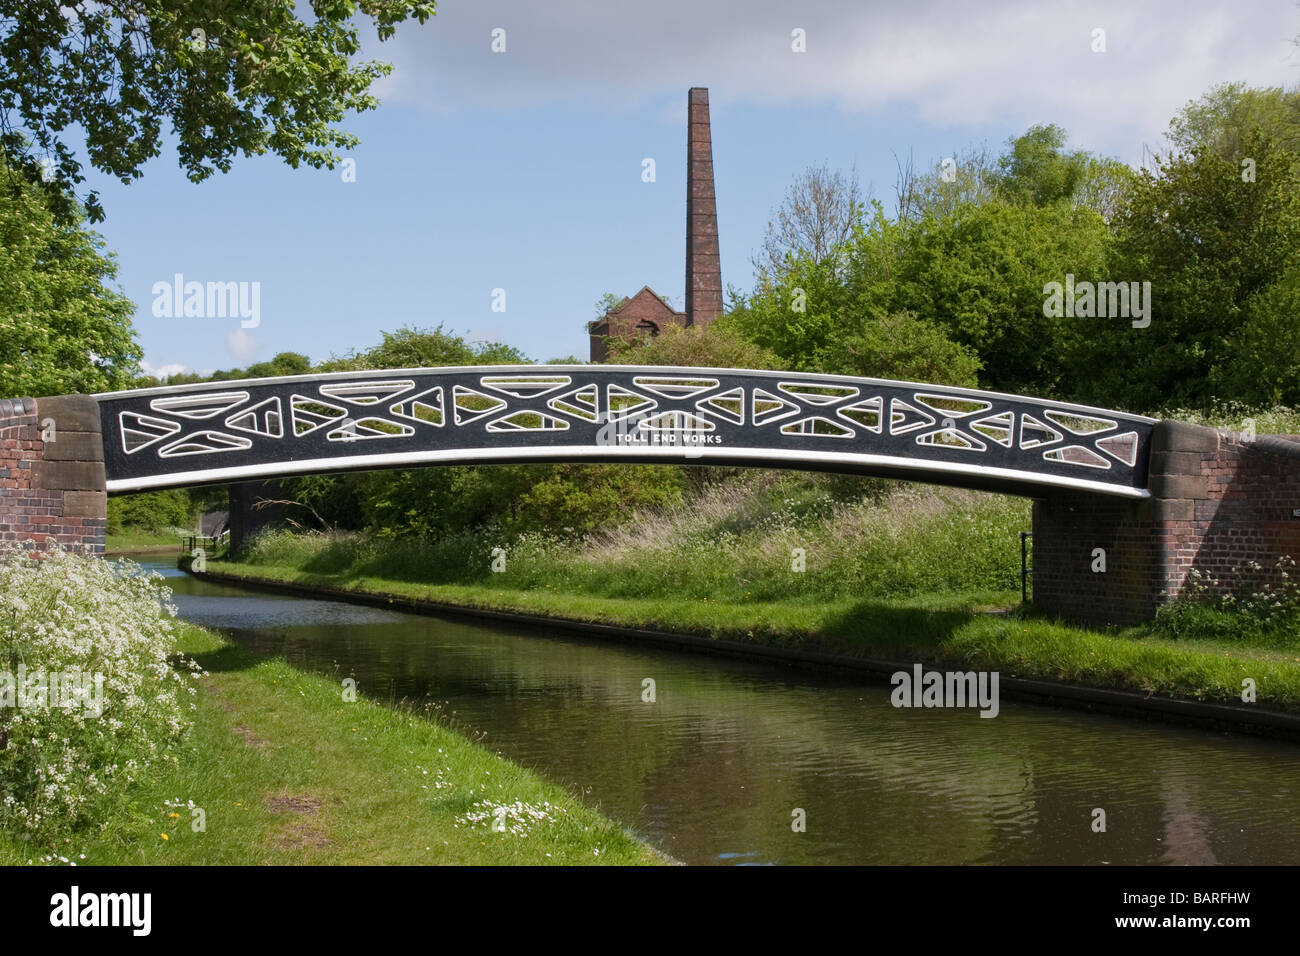 the canal system at 'windmill end' in the 'black country' Stock Photo